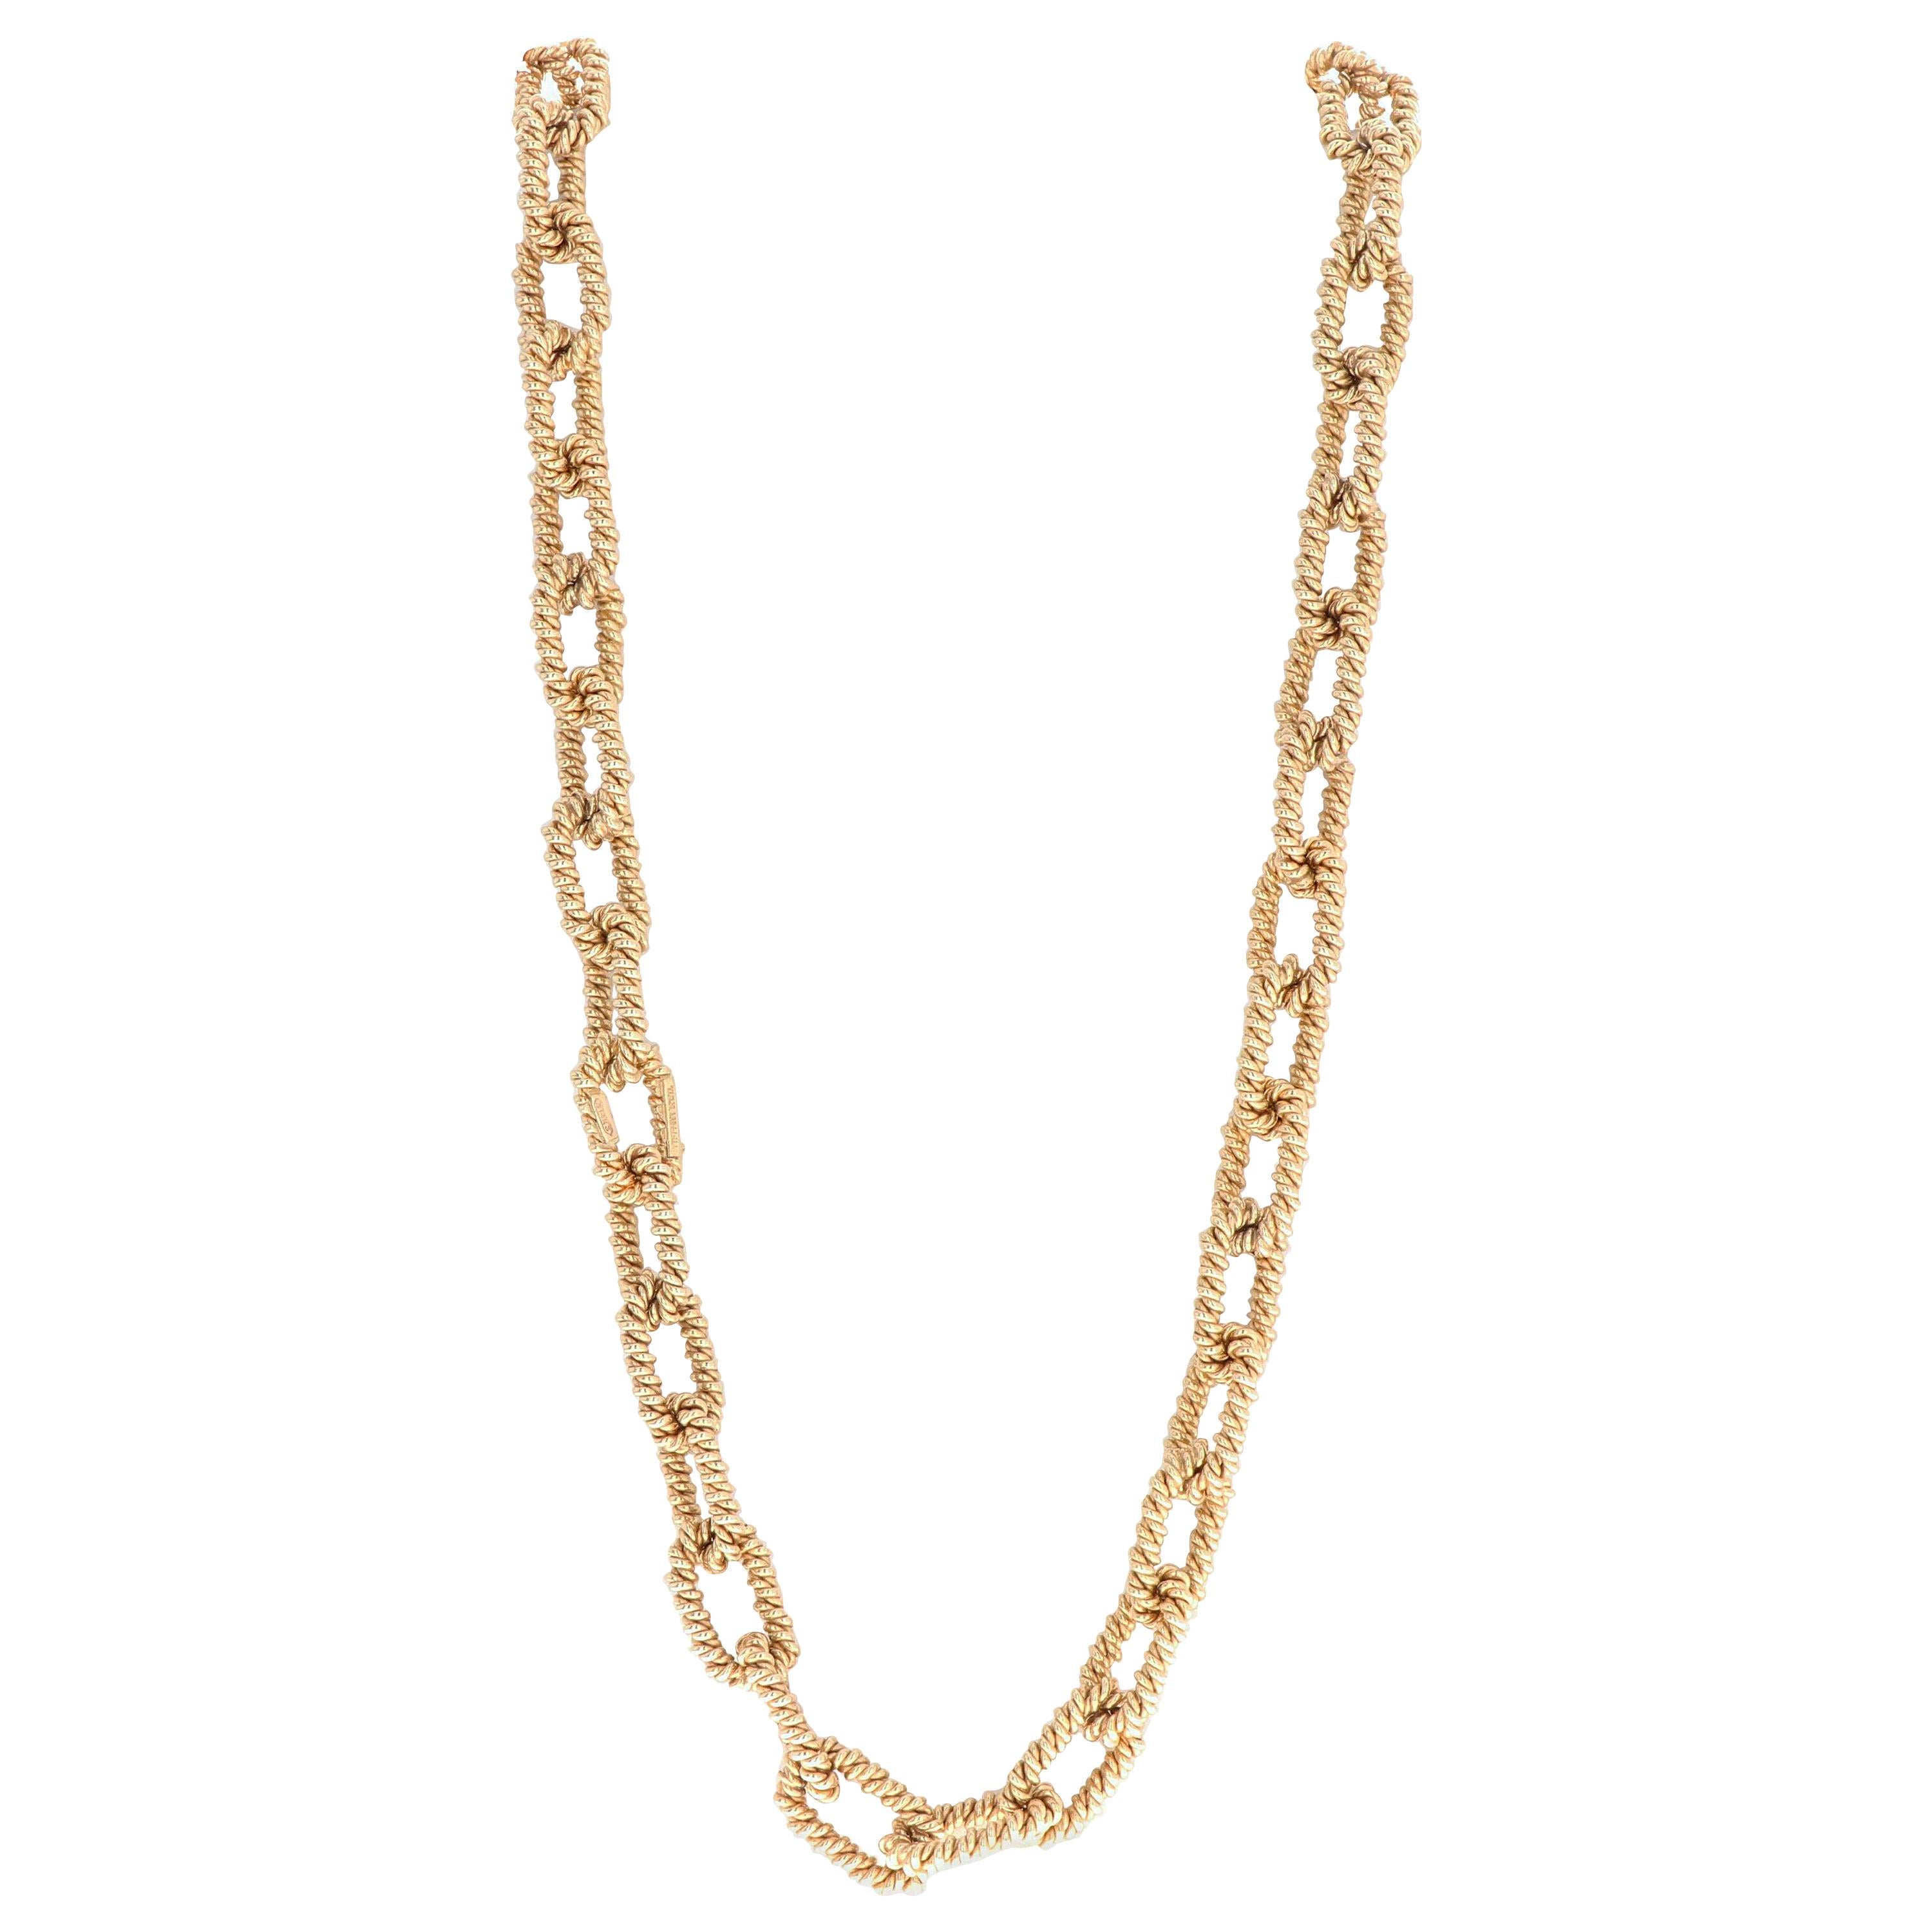 Tiffany & Co. 14 Karat Yellow Gold Link Necklace